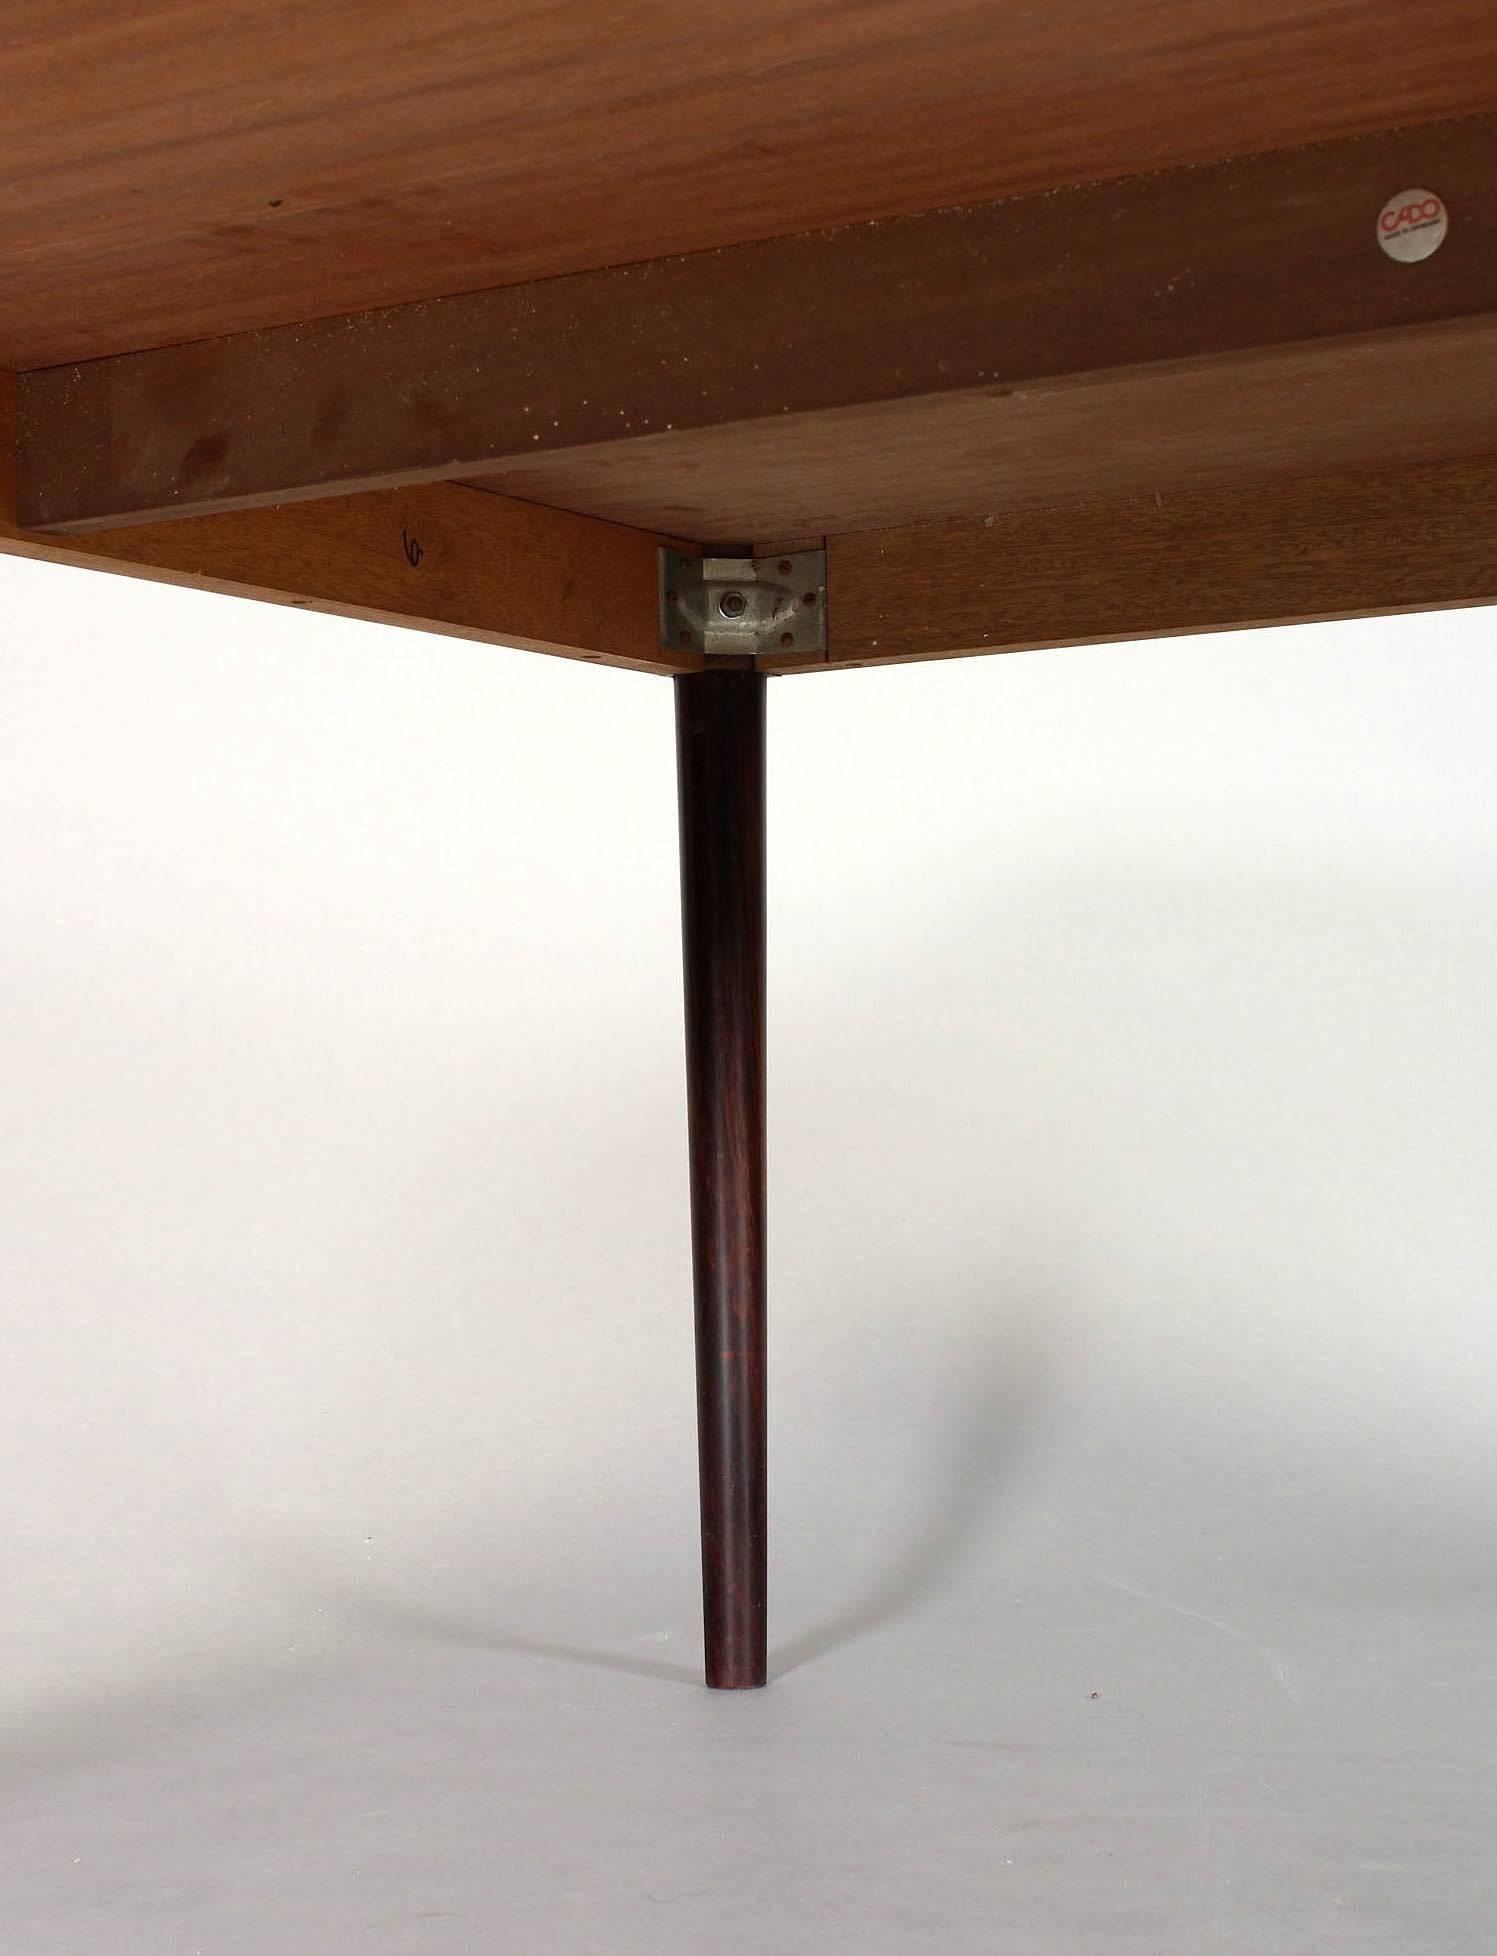 This executive desk, dining or conference table from the Diplomat series was designed by Finn Juhl and produced in the 1960s-1970s by Cado in Denmark (marked). The table features a rosewood veneer top and legs in solid rosewood, which can be screwed